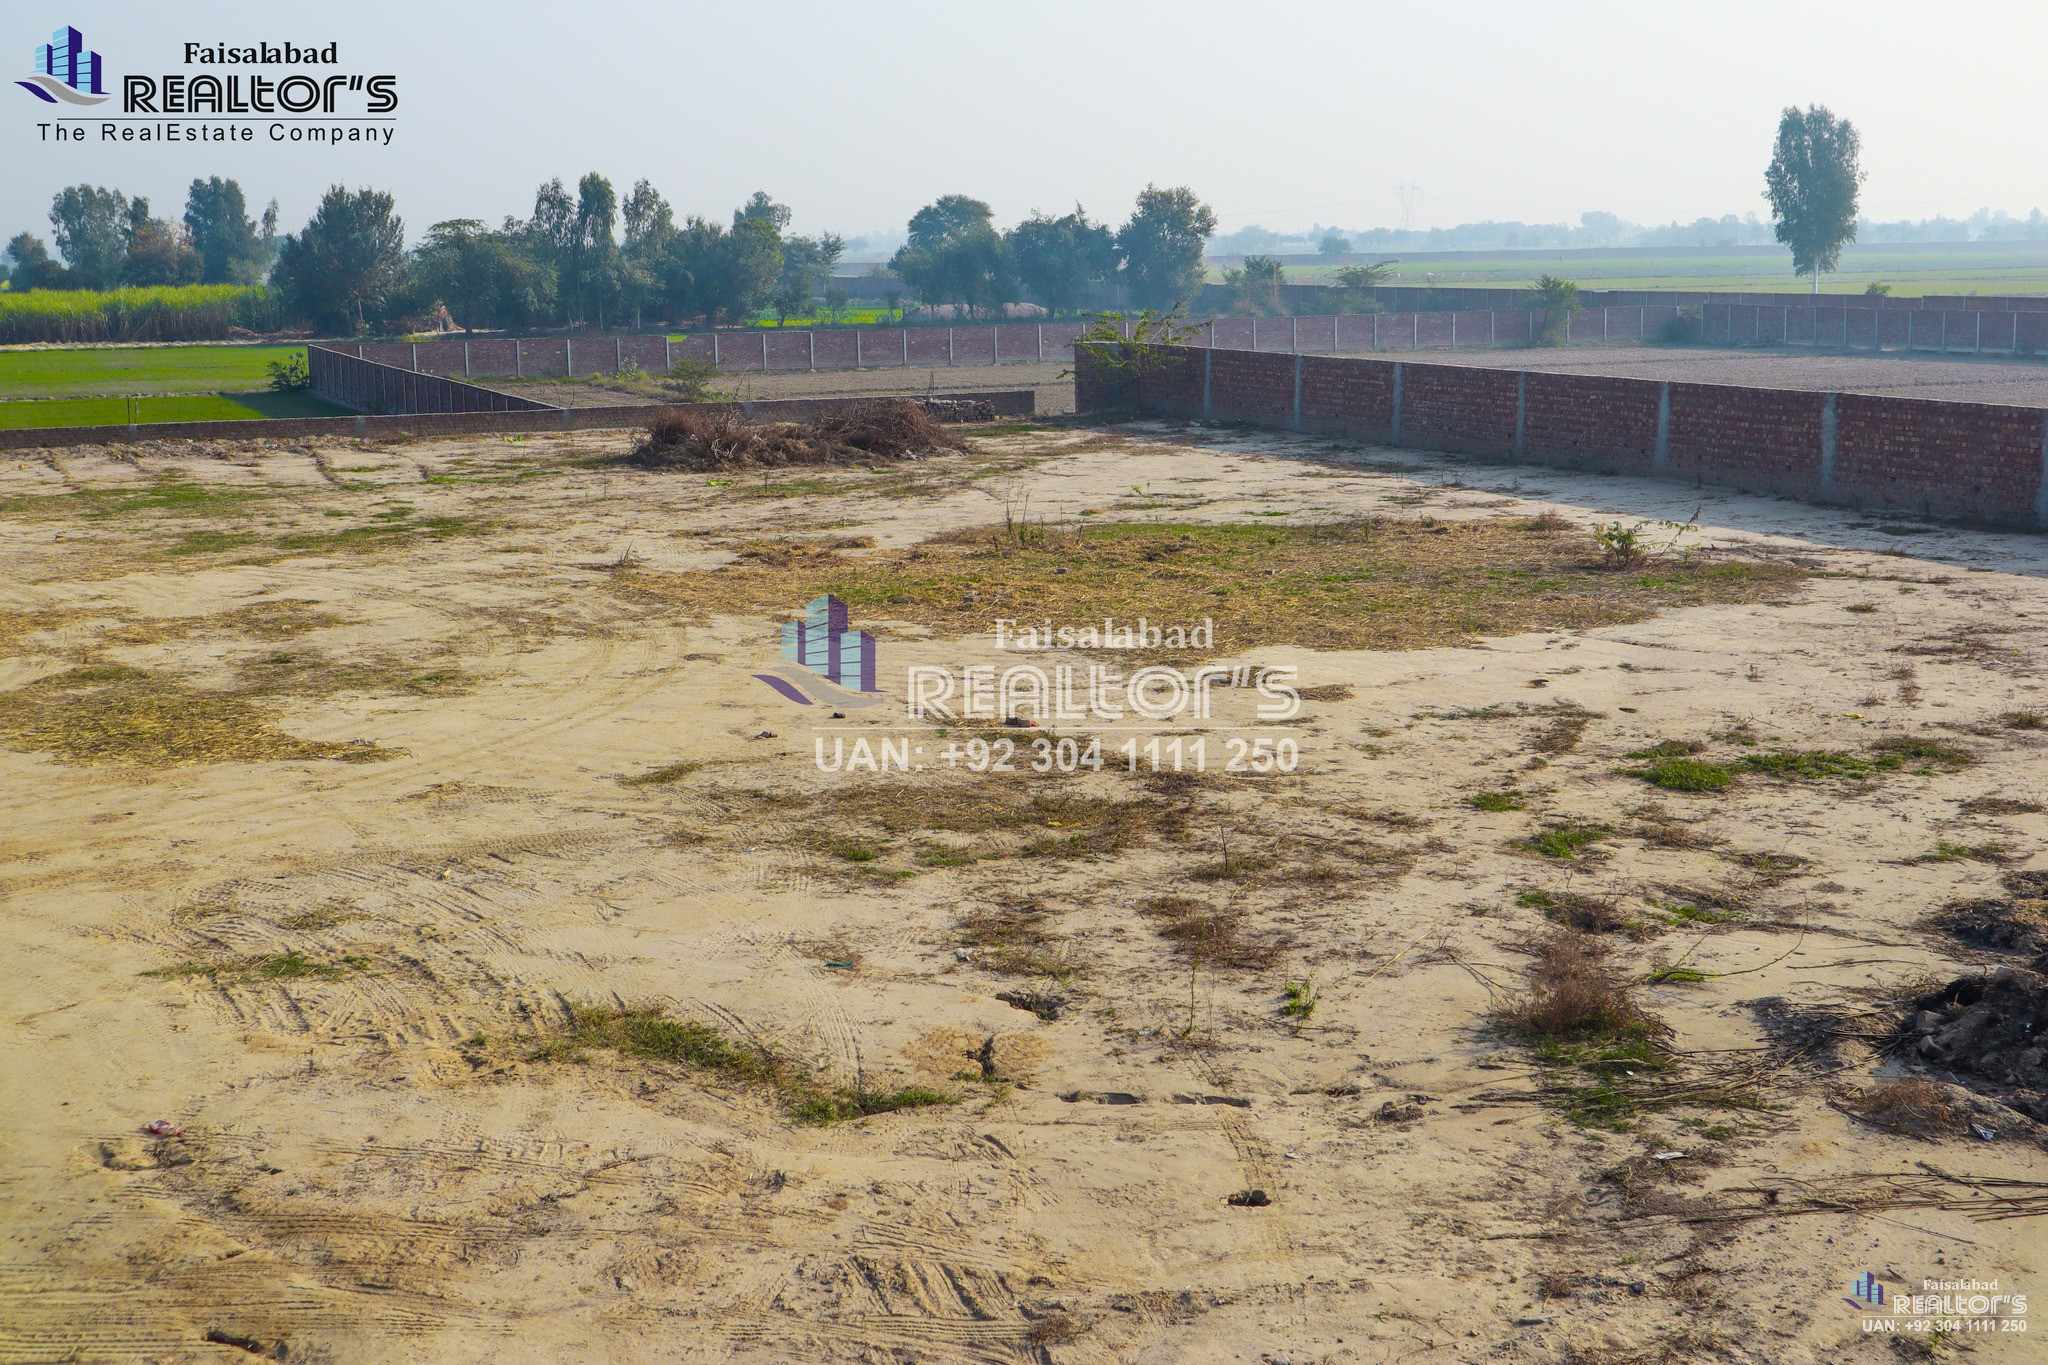 Commercial Land for Sale In Faisalabad